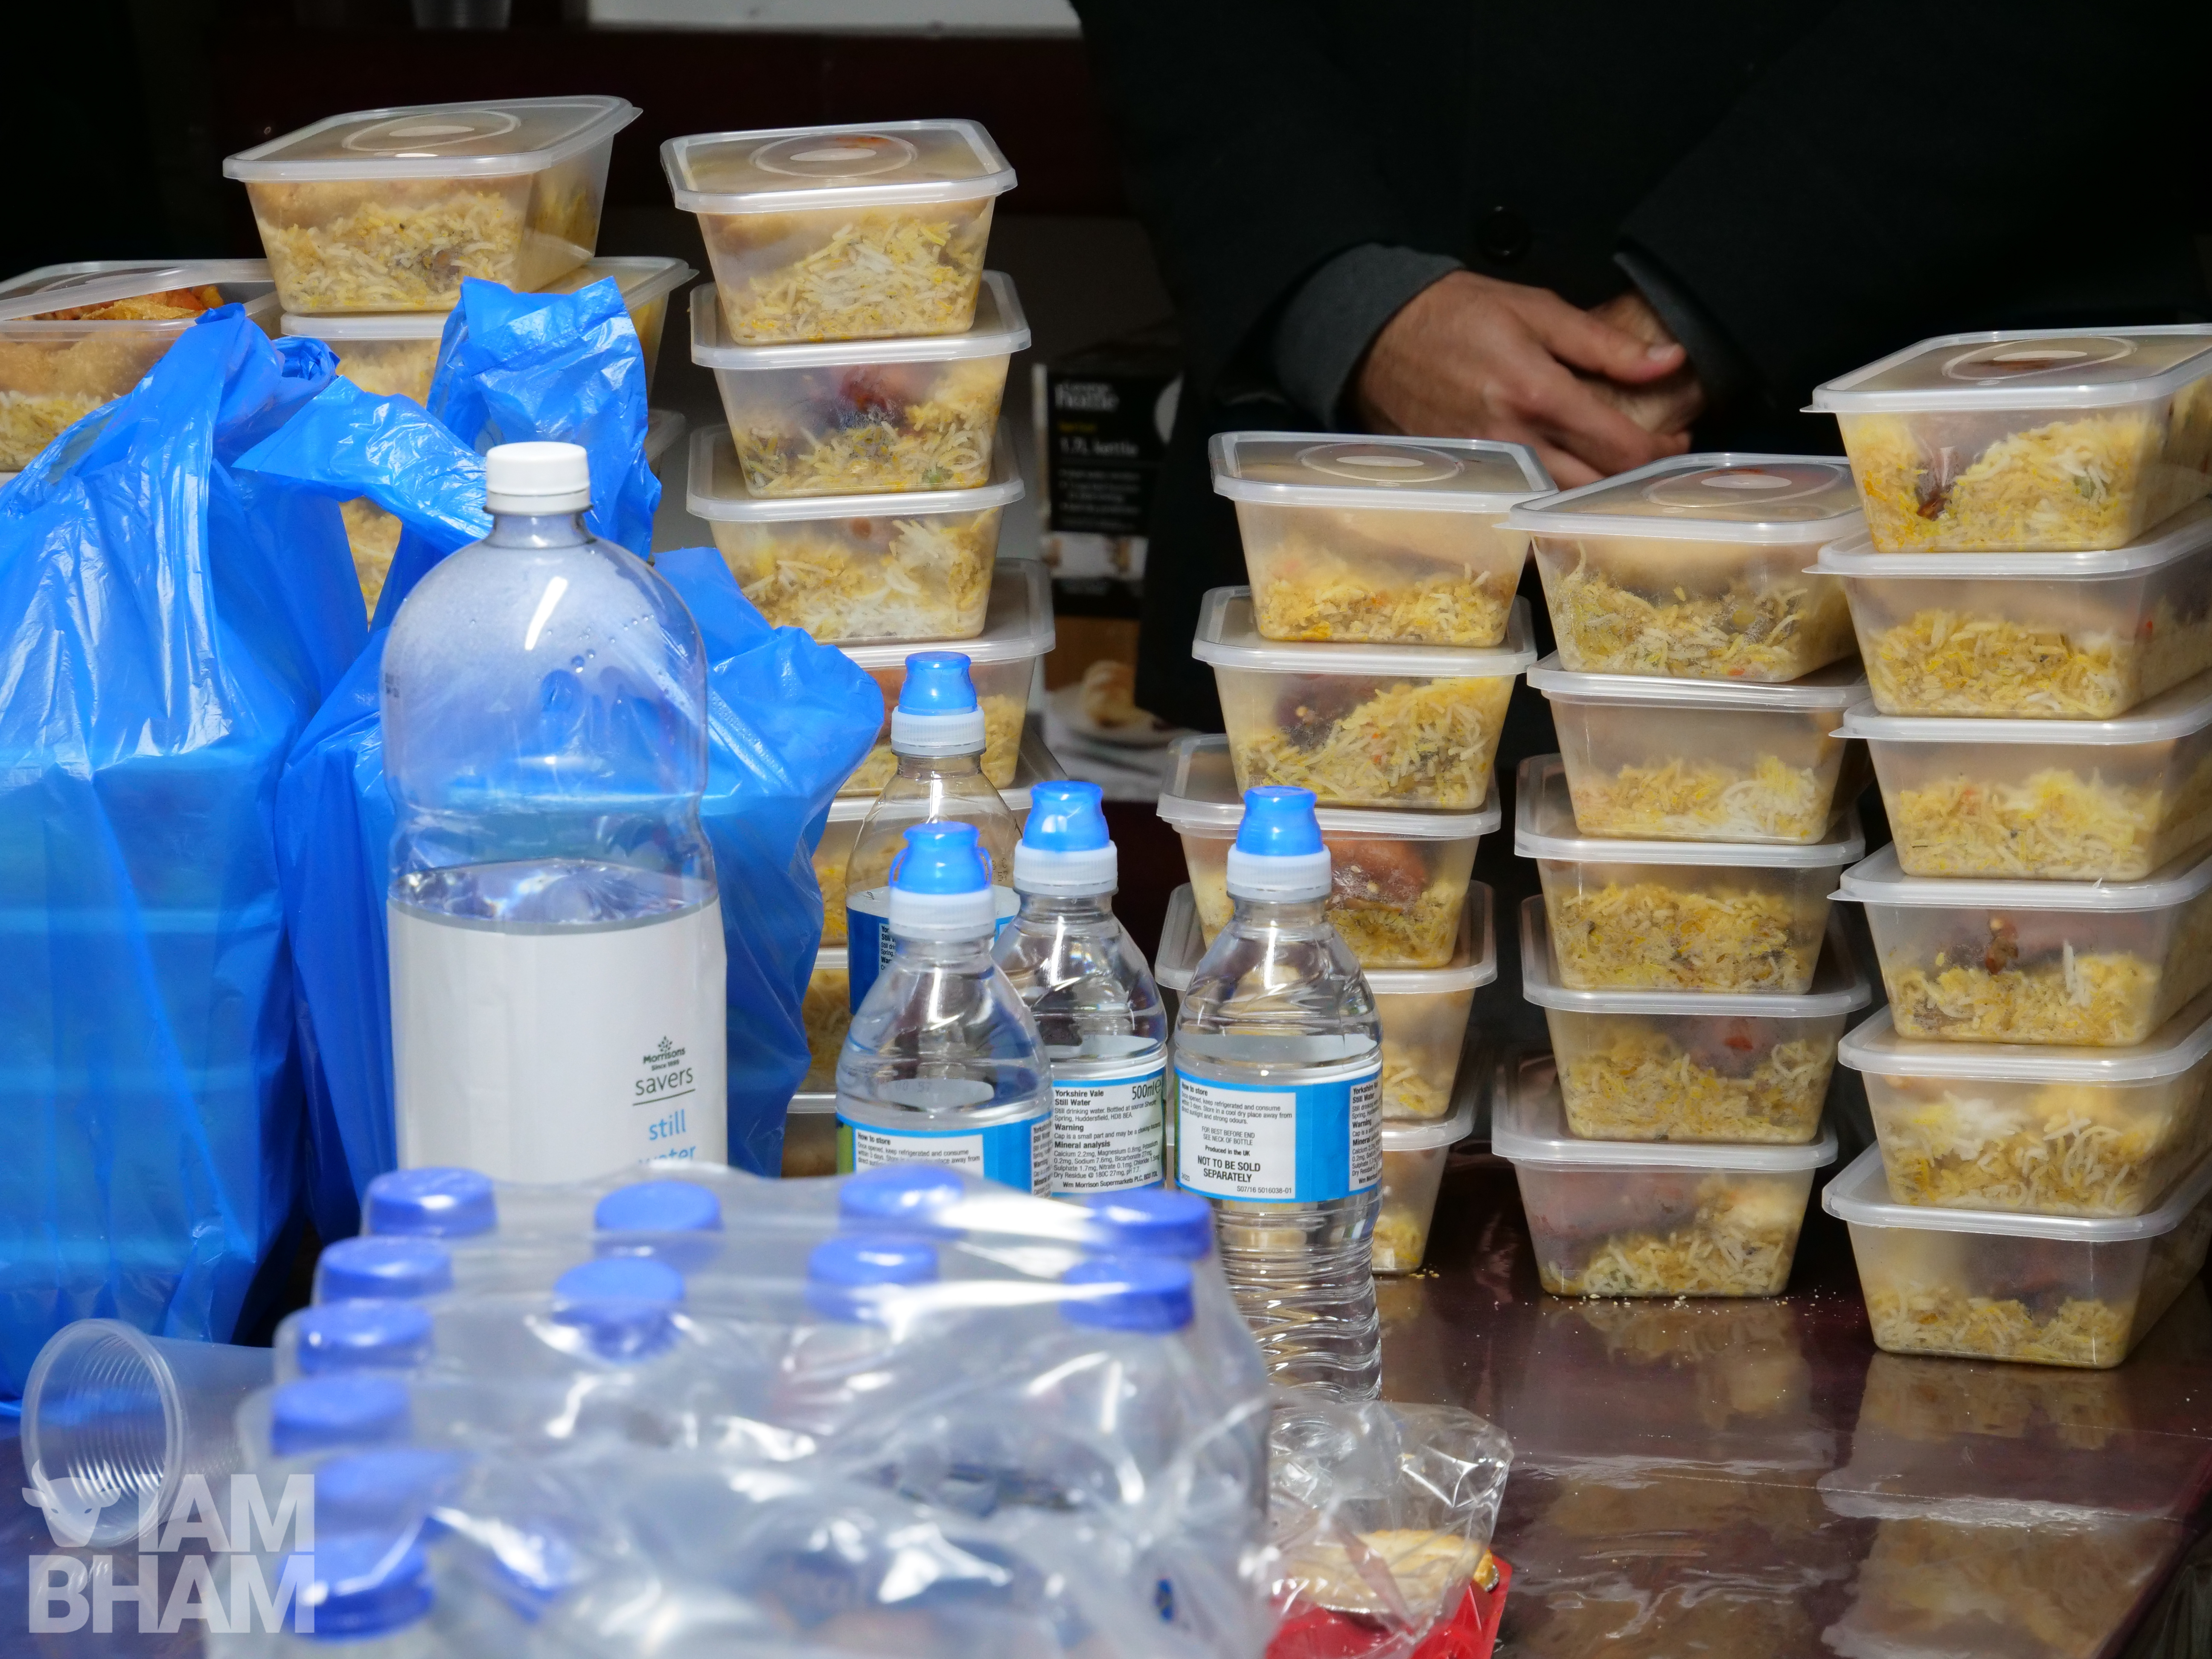 This is the third year the Birmingham Central Mosque have hosted a soup kitchen over the festive period